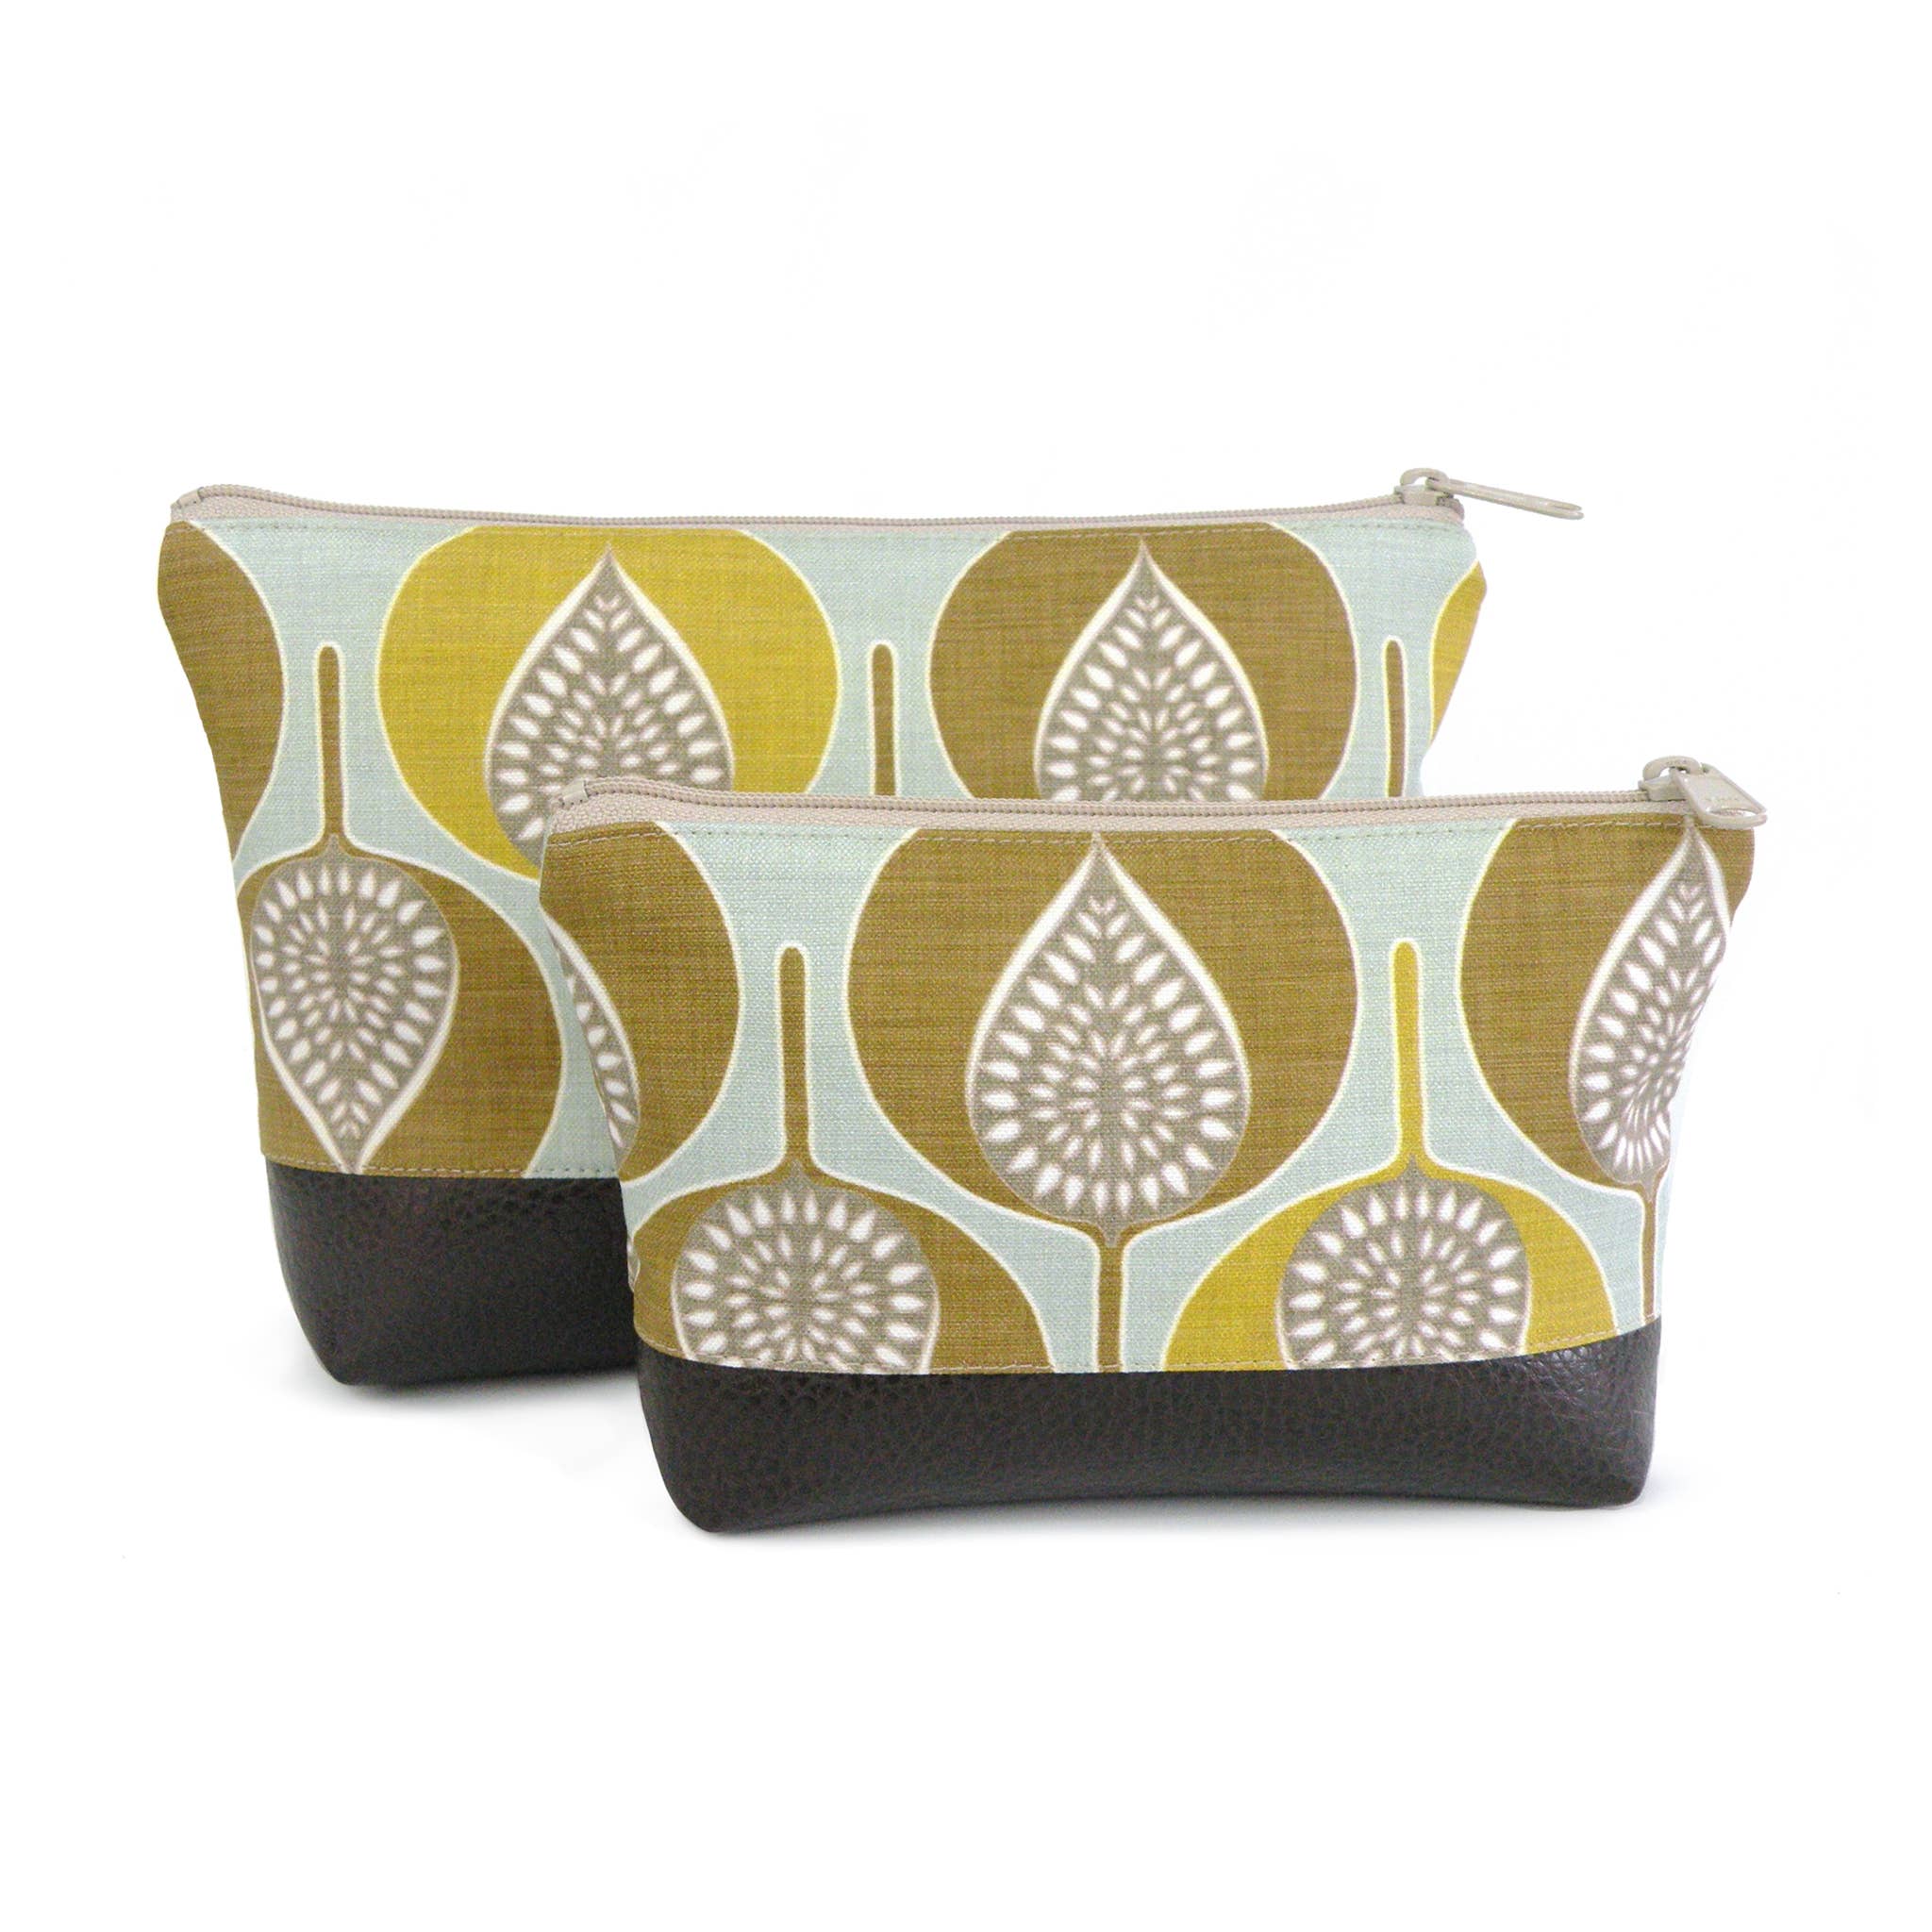 Large Cosmetic Clutch in Modern Green Leaves Print